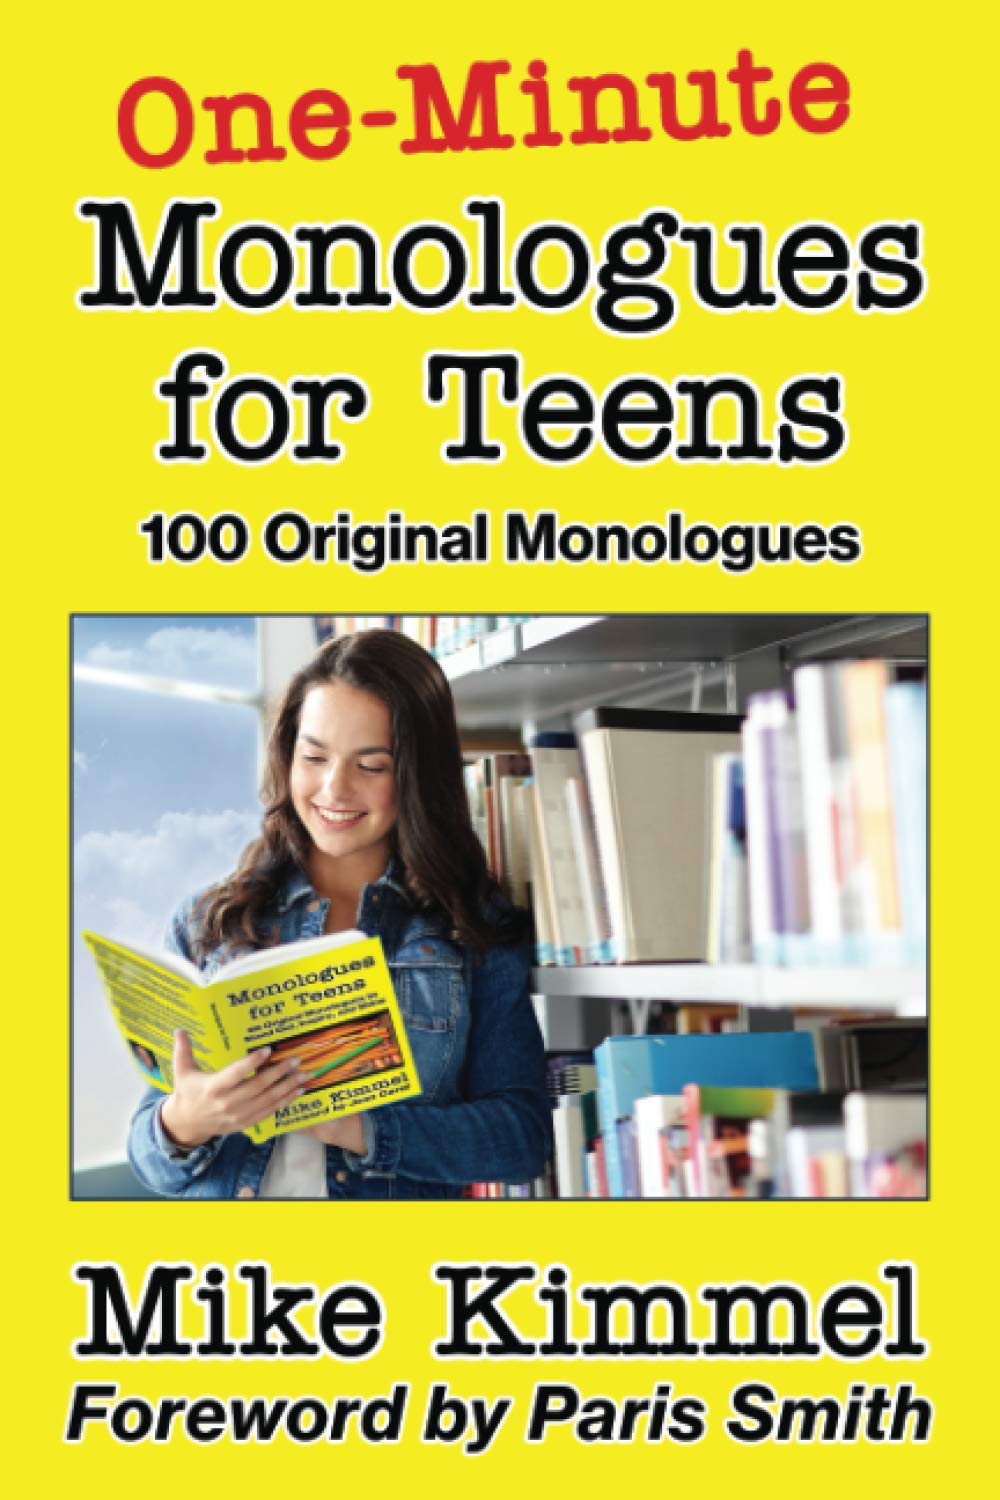 Monologue for kids